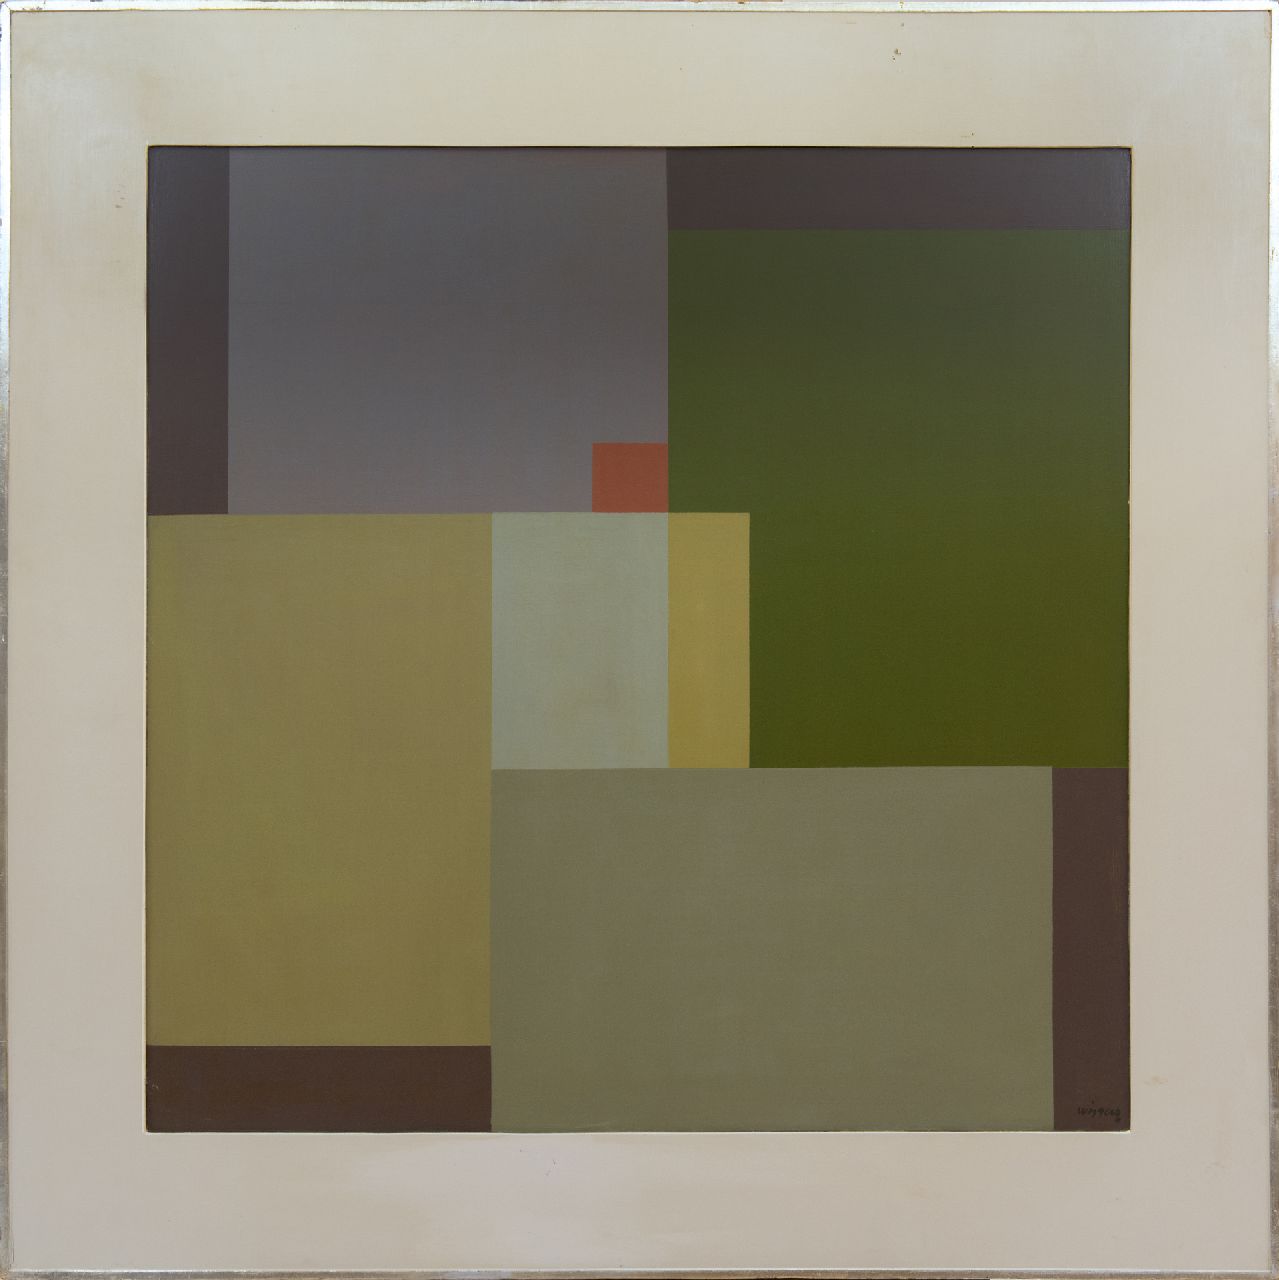 Wiggers K.H.  | 'Karel' Hendrik Wiggers | Paintings offered for sale | Composition II, oil on panel 79.0 x 79.0 cm, signed l.r. and dated on the reverse '88